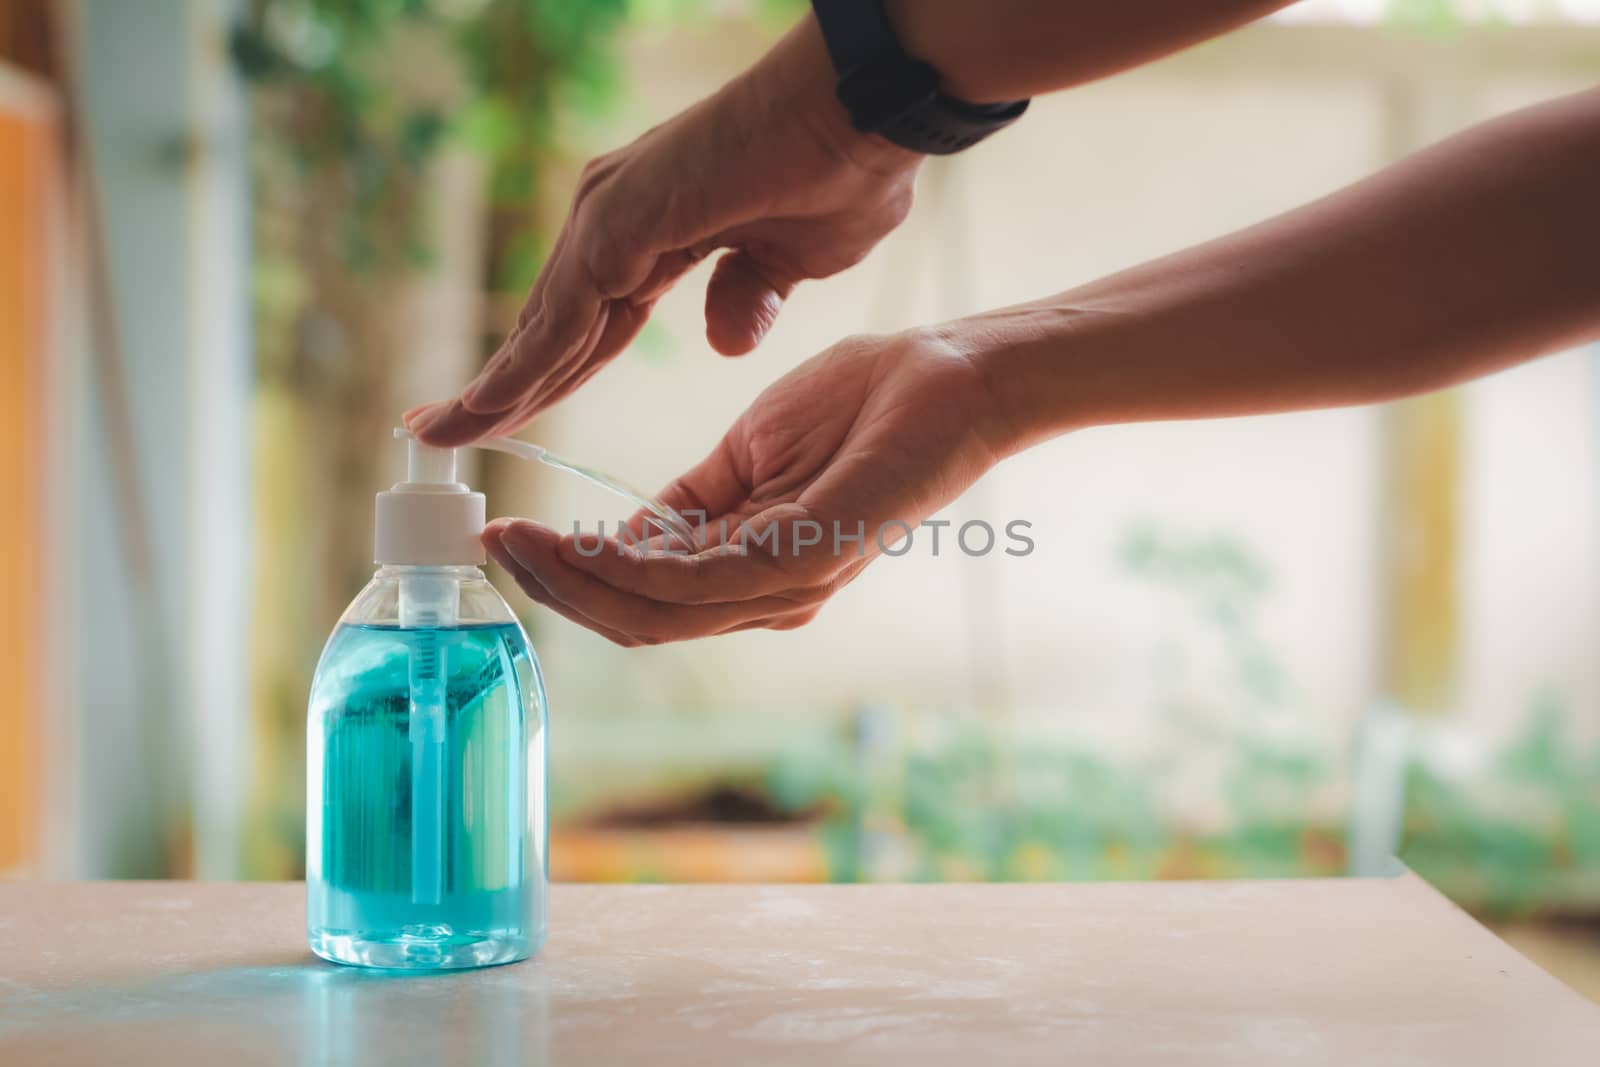 Hygiene and health care concept. Human hand pressing on a bottle by iiinuthiii